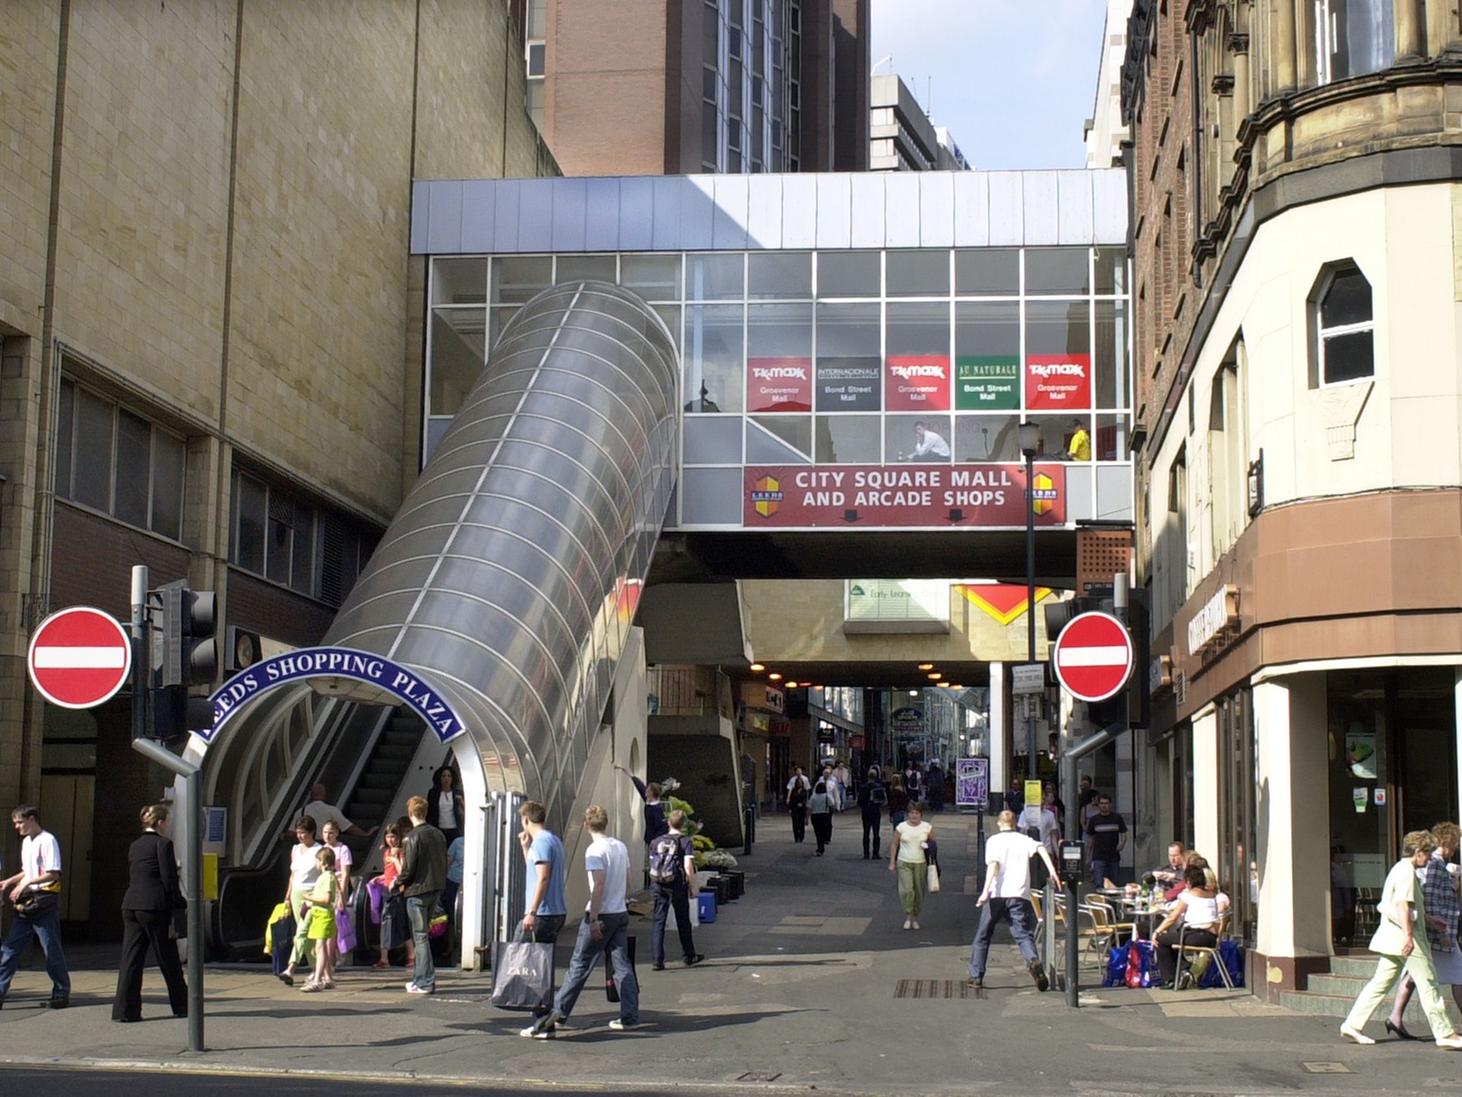 Remember this escalator at the Leeds Shopping Plaza on Albion Street?